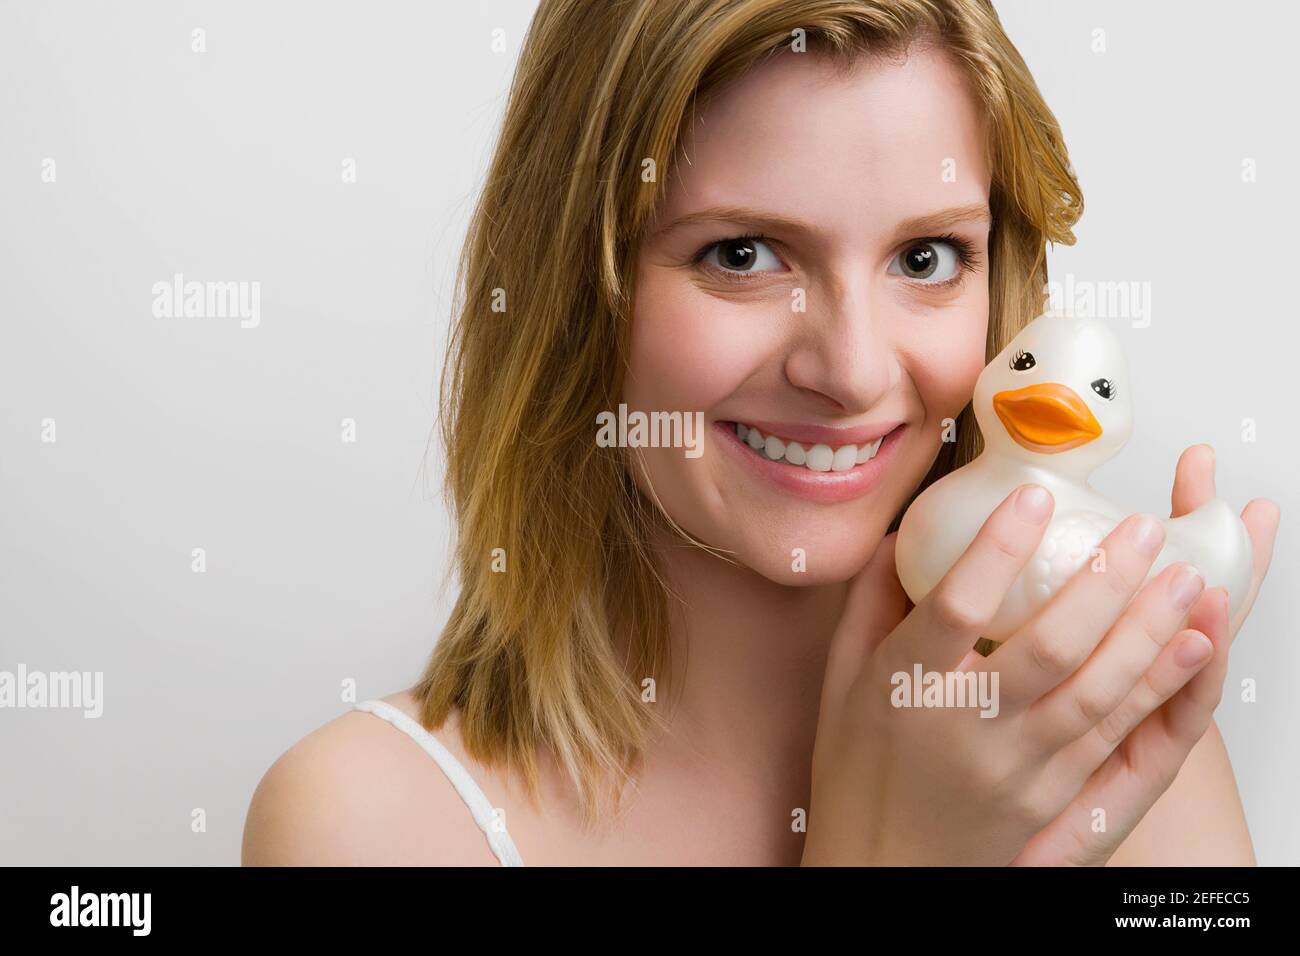 Portrait of a teenage girl holding a rubber duck and smiling Stock Photo